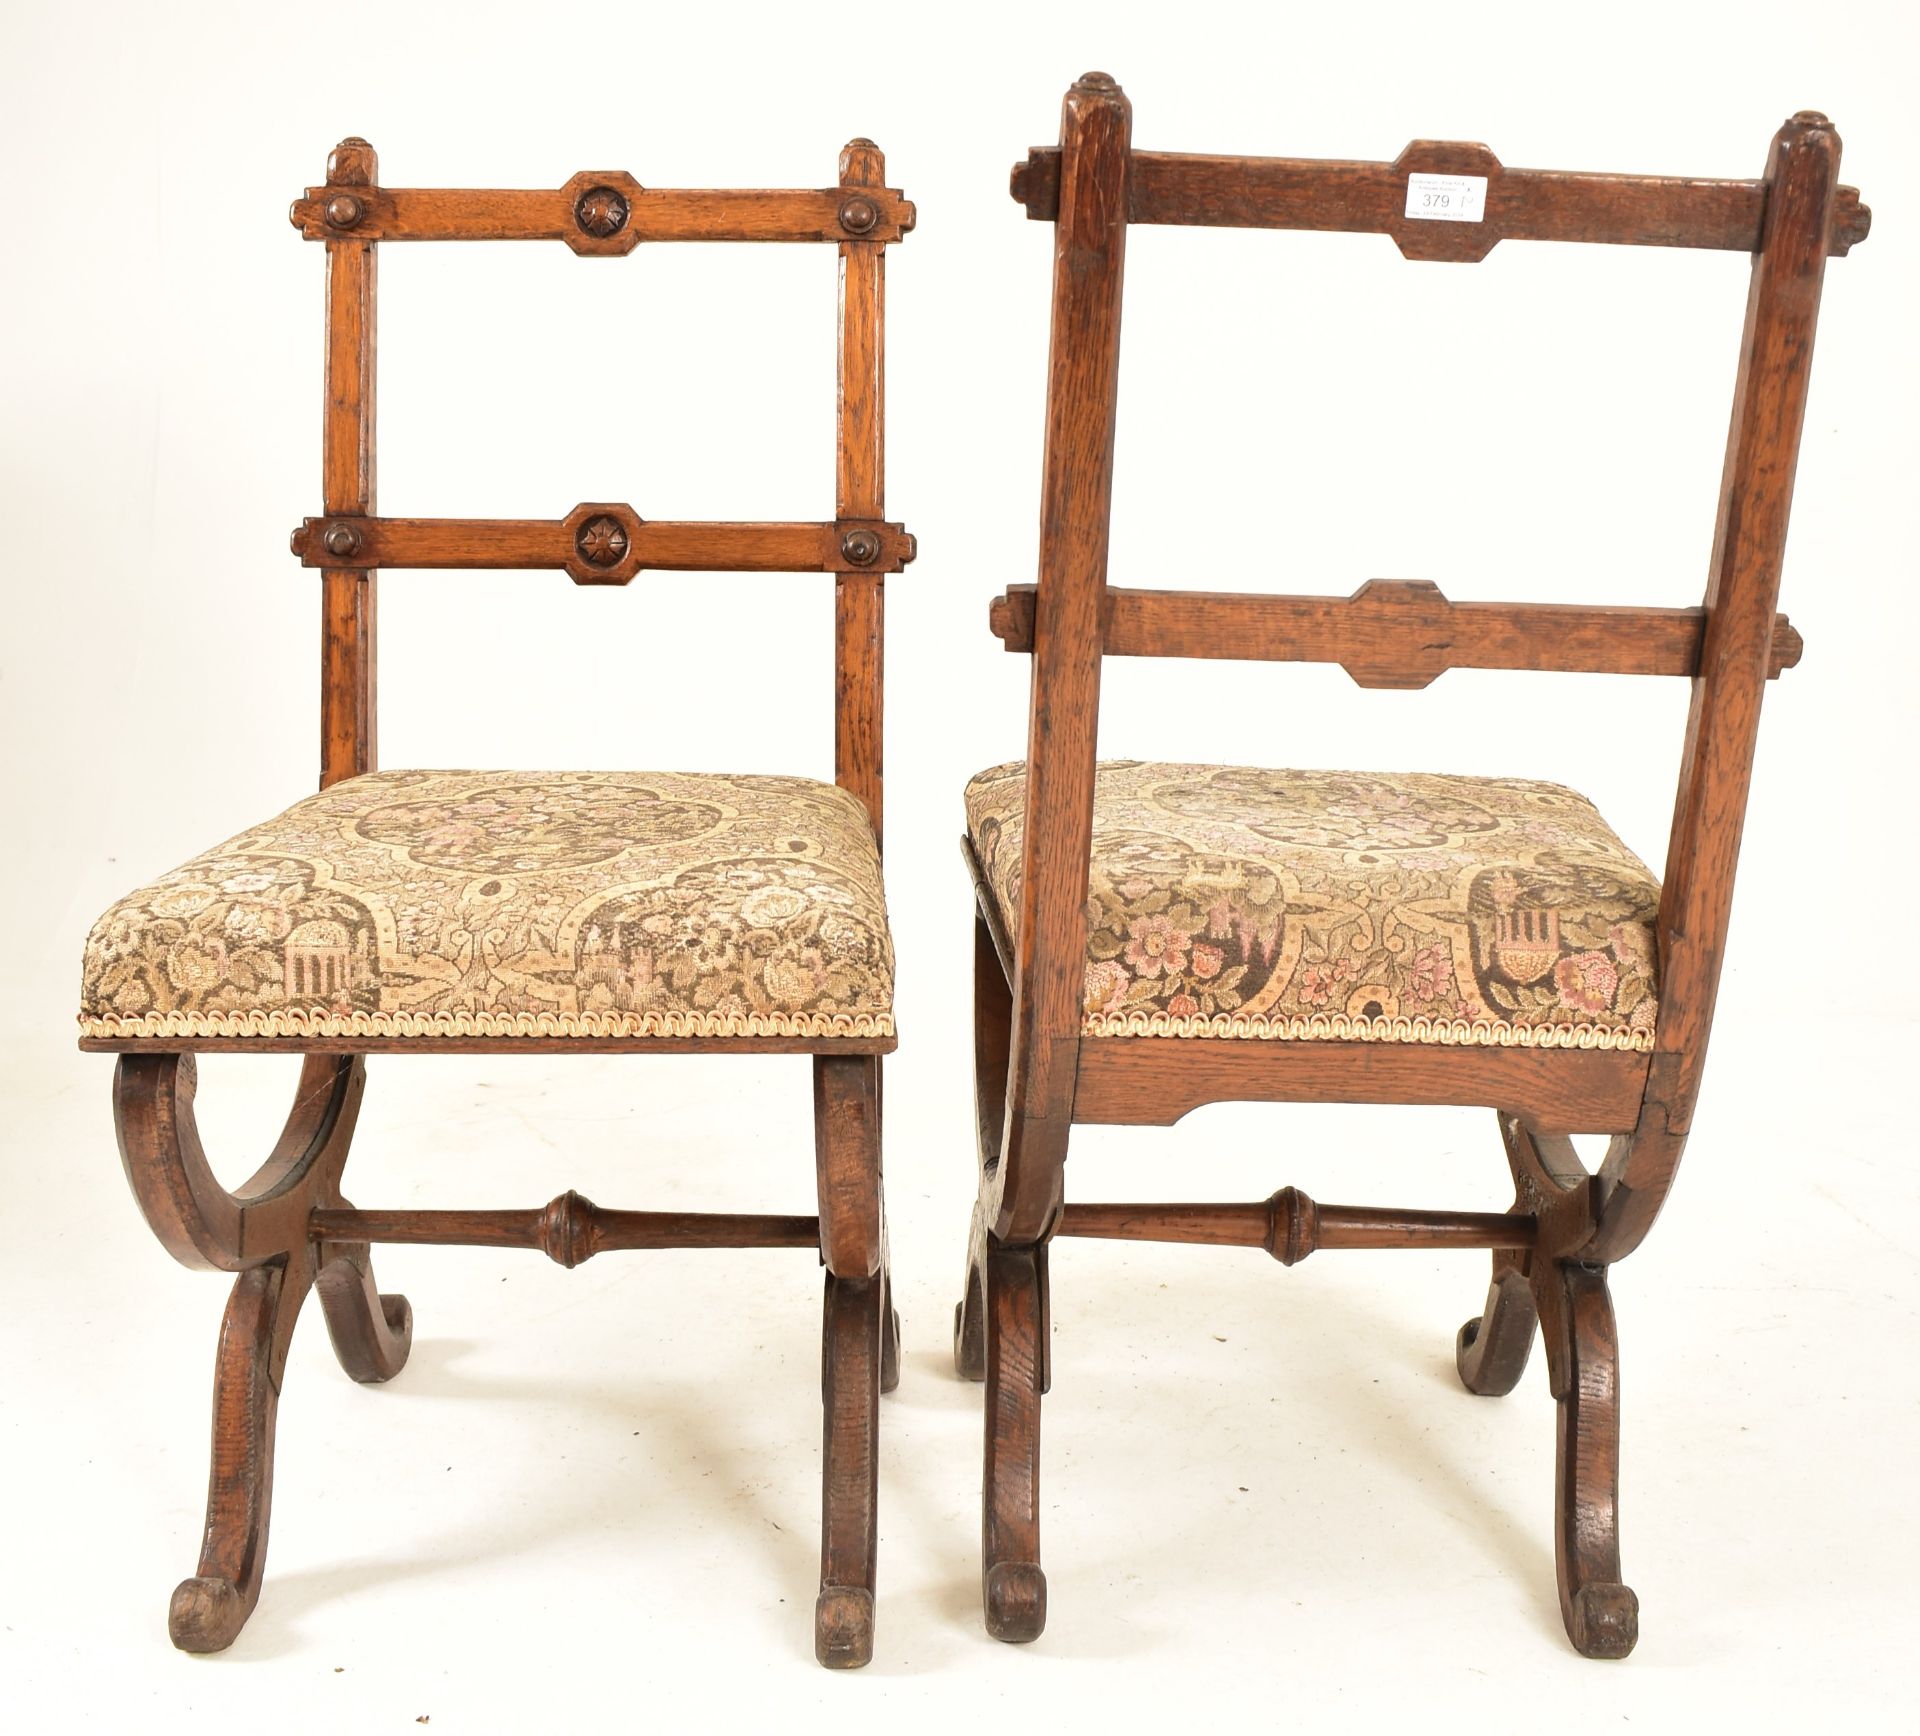 PAIR OF 19TH CENTURY CARVED OAK GOTHIC INSPIRED CHAIRS - Image 3 of 5